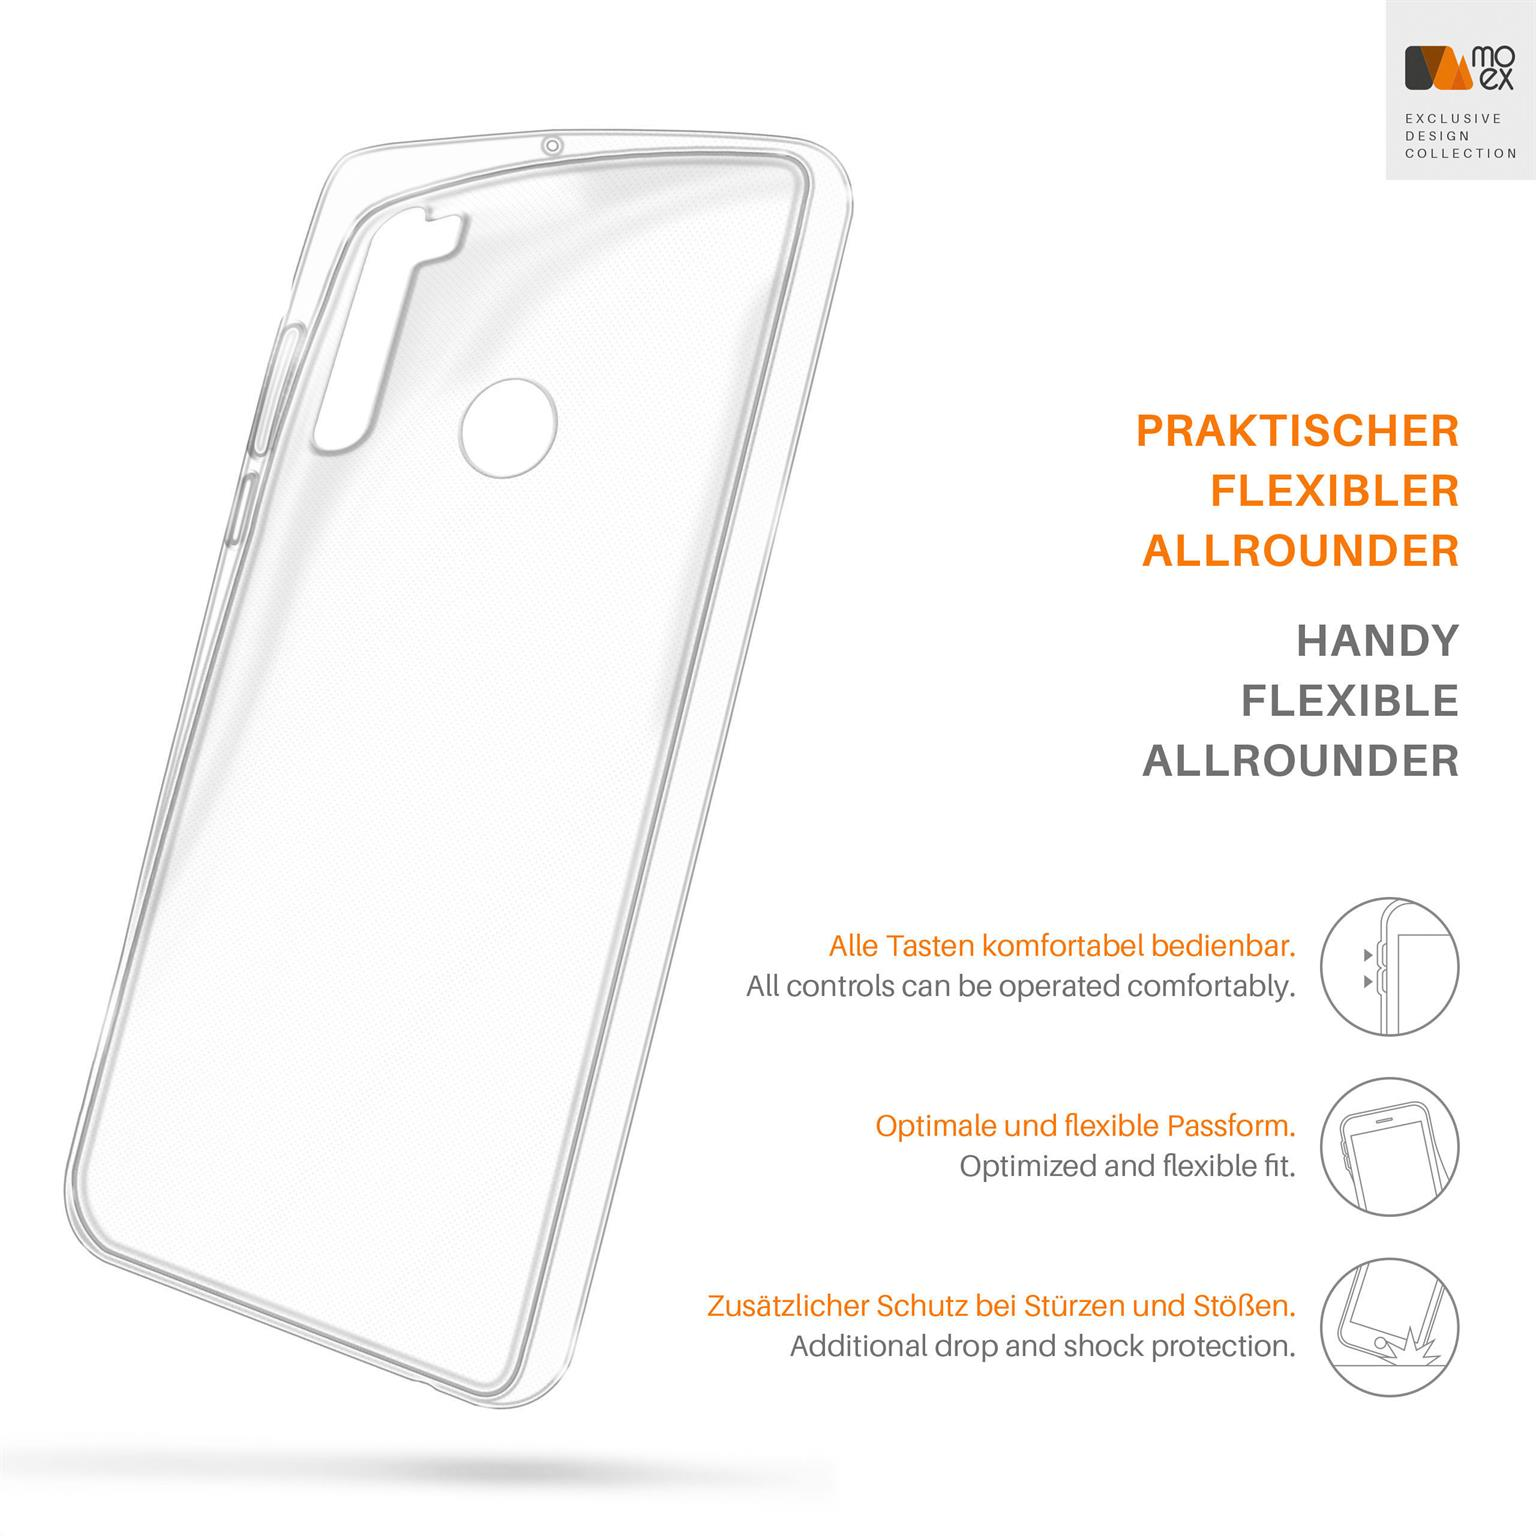 Redmi Case, 8, Aero Xiaomi, Note MOEX Backcover, Crystal-Clear